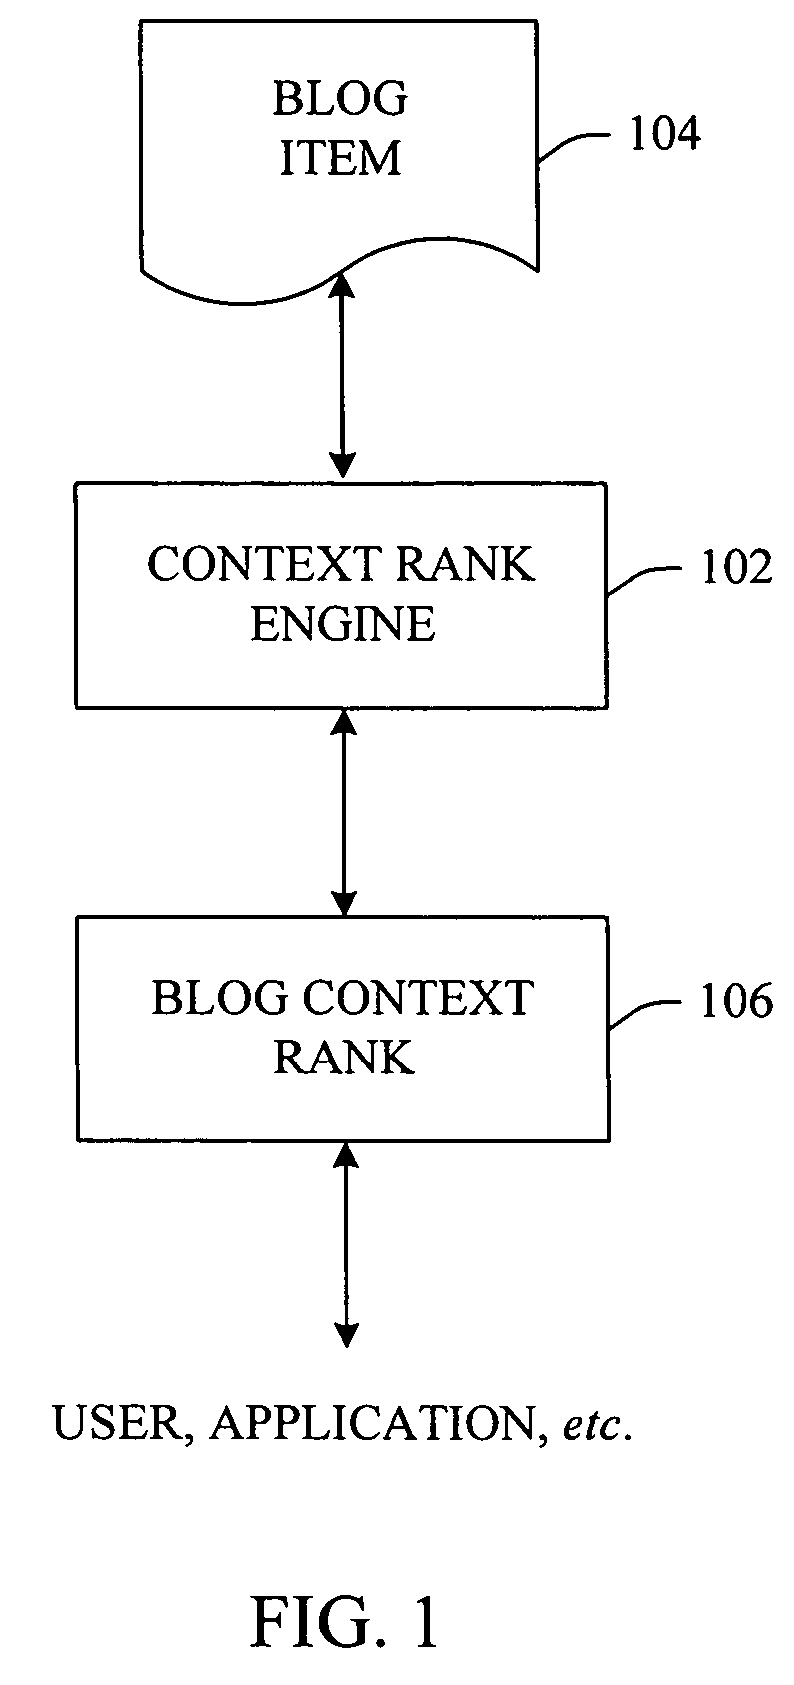 Generate blog context ranking using track-back weight, context weight and, cumulative comment weight